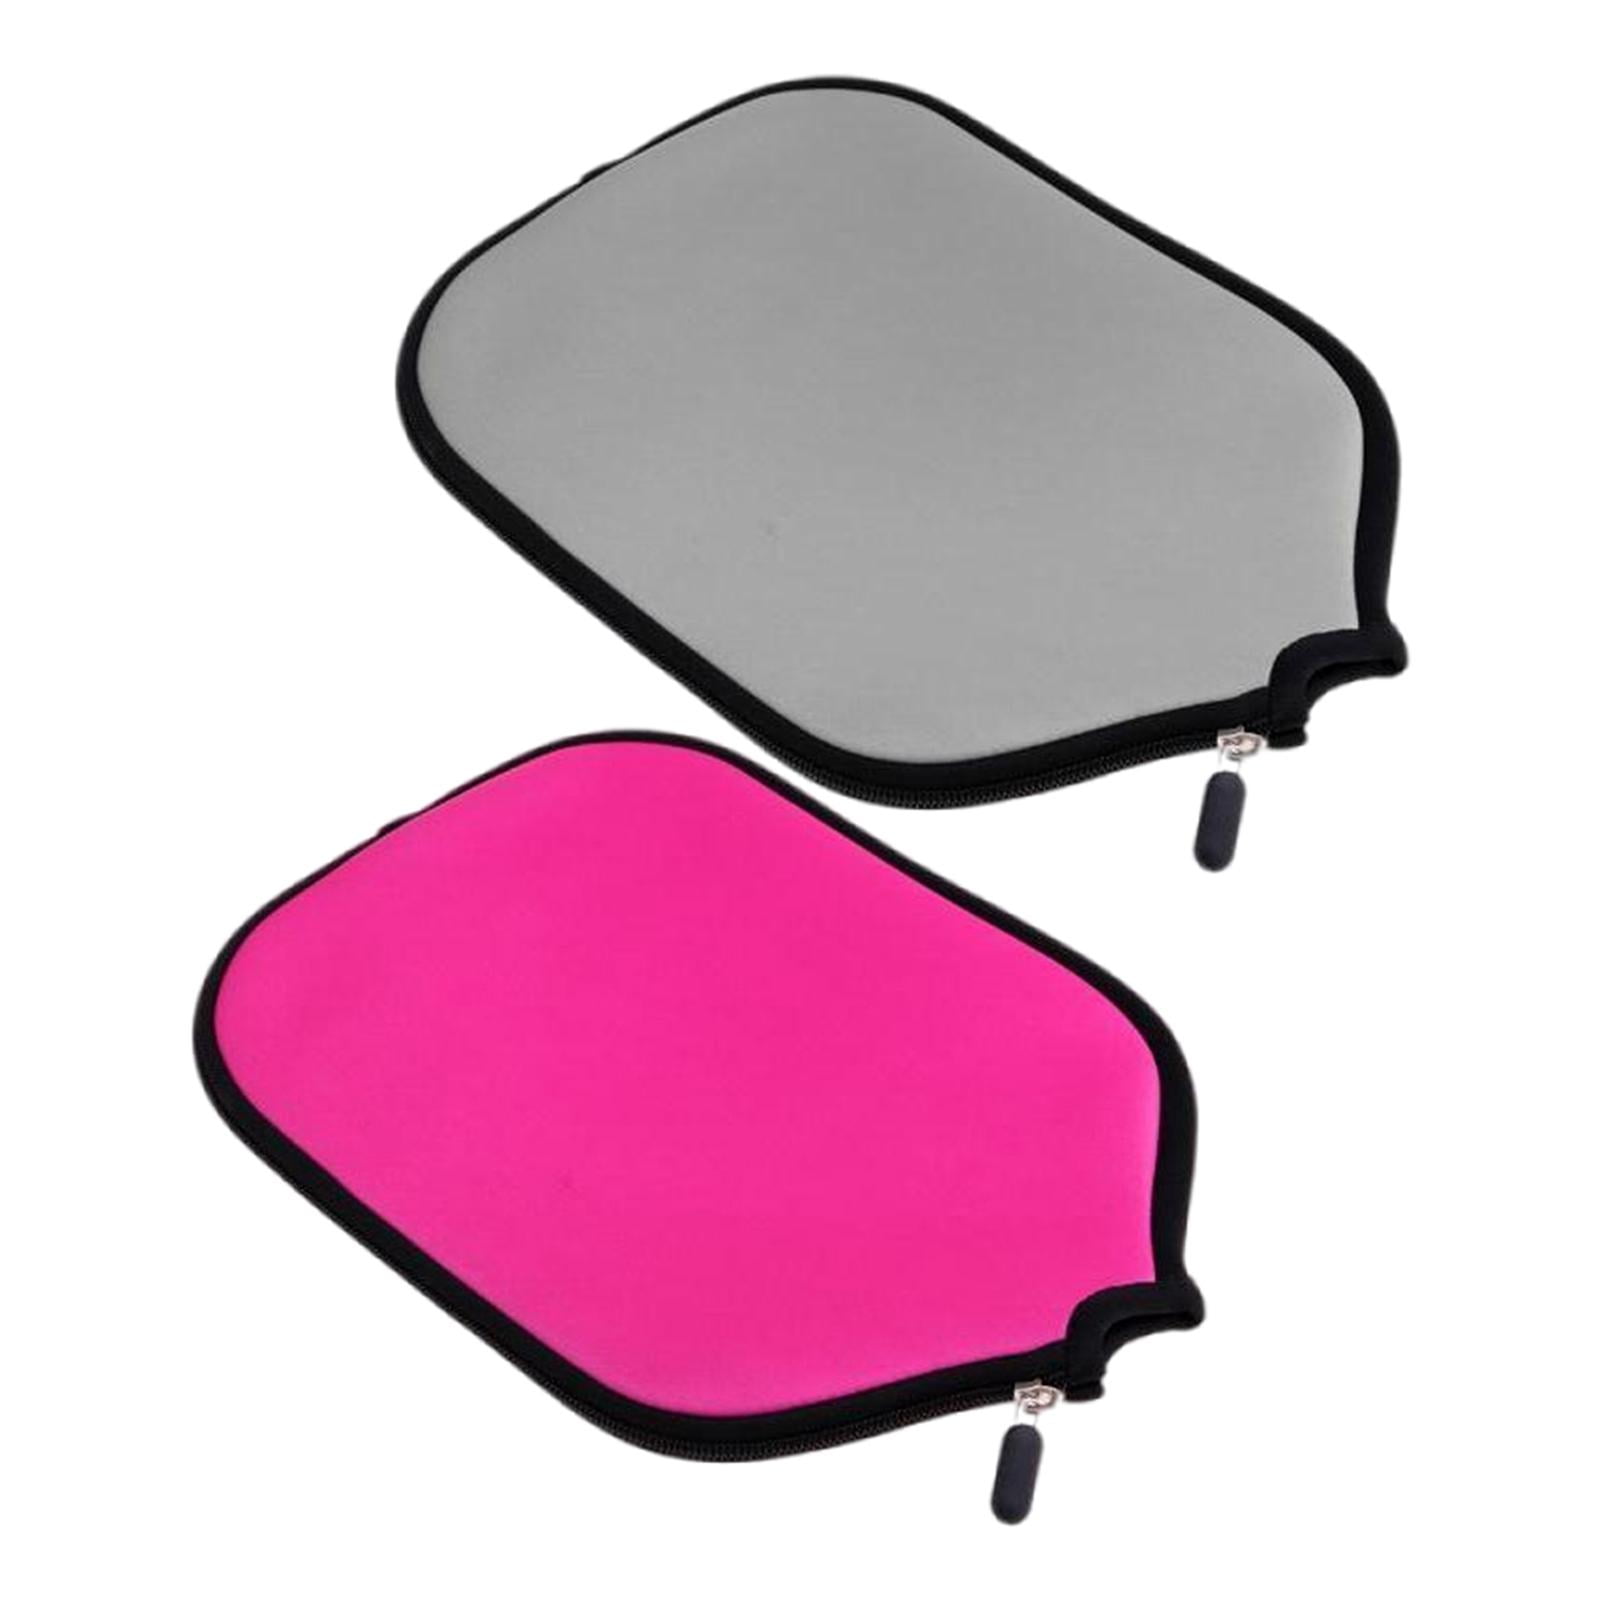 Universal Fits Most Racket Neoprene Sports Pickleball Paddle Protect Cover 